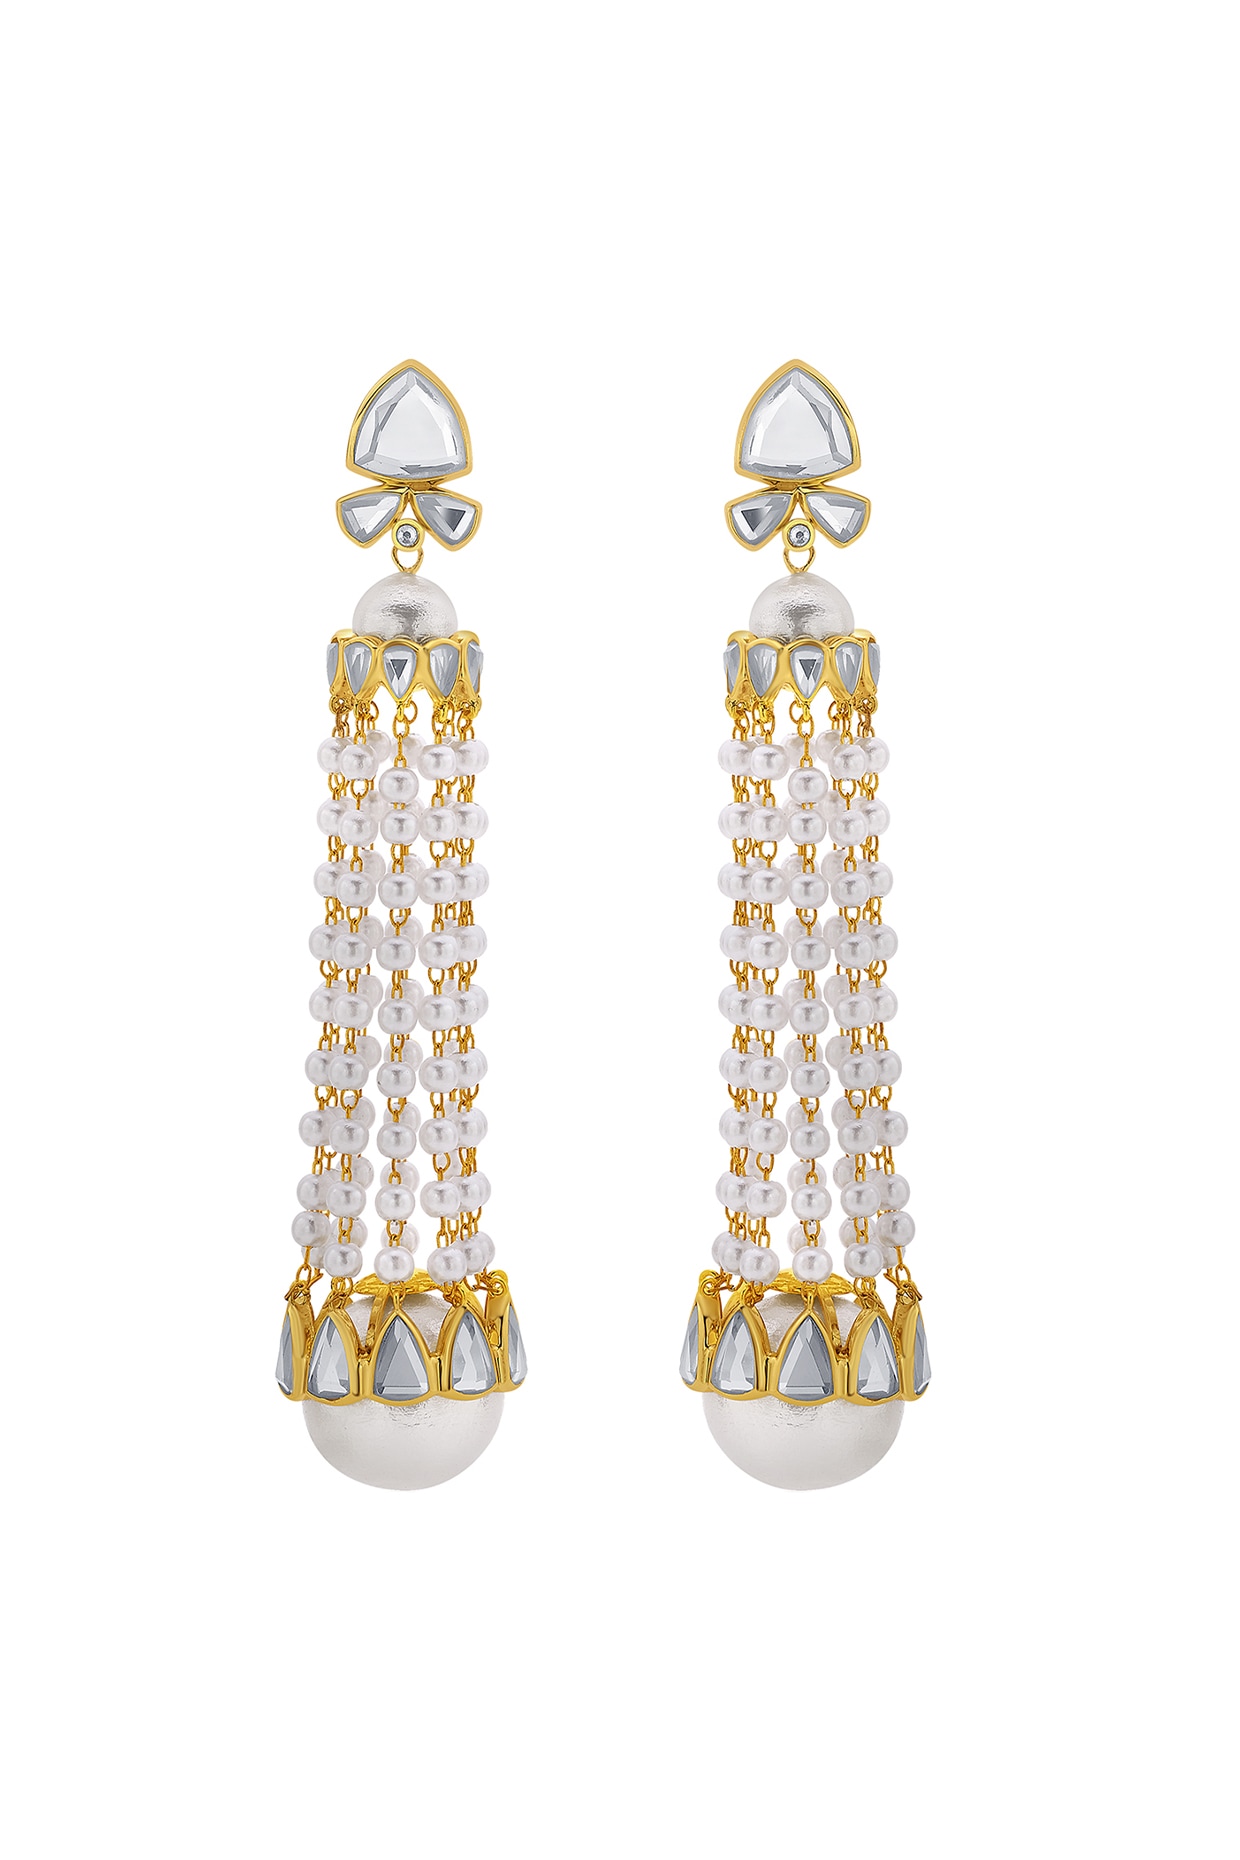 Discover more than 203 gold and pearl chandelier earrings latest